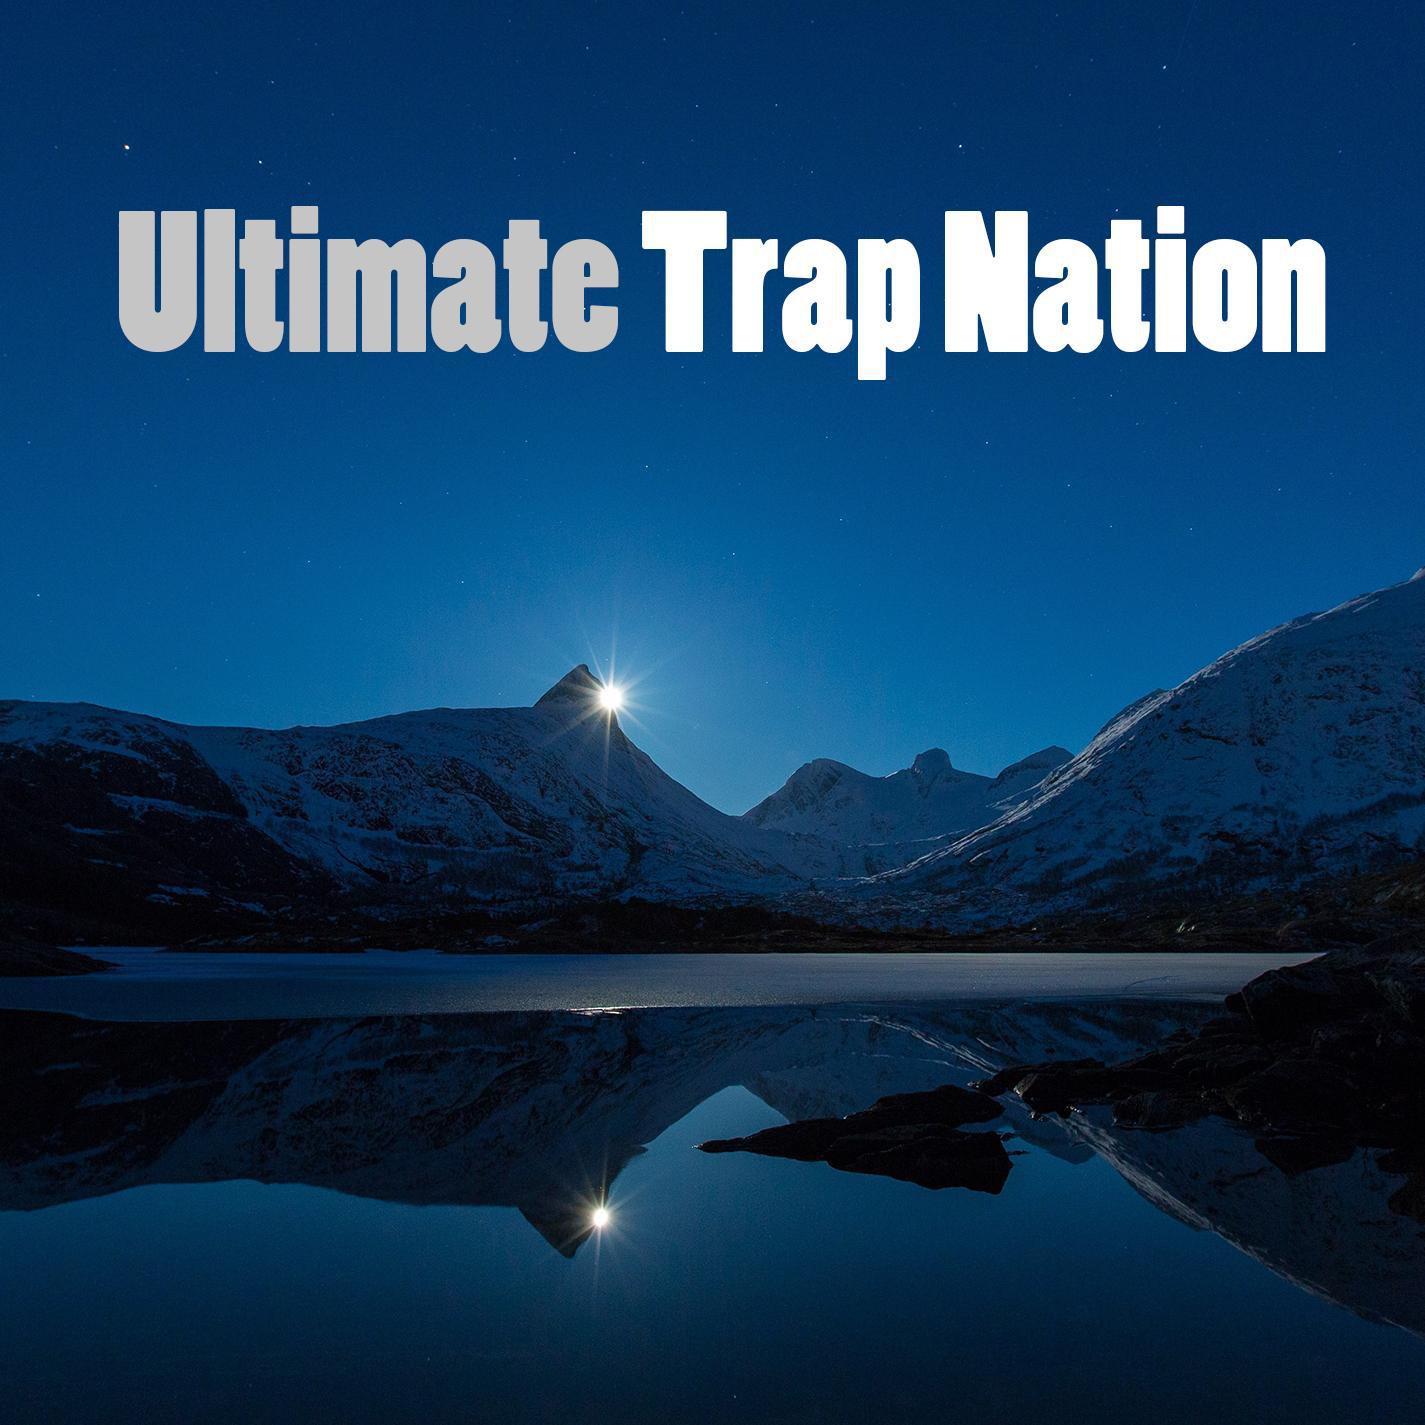 Ultimate Trap Nation